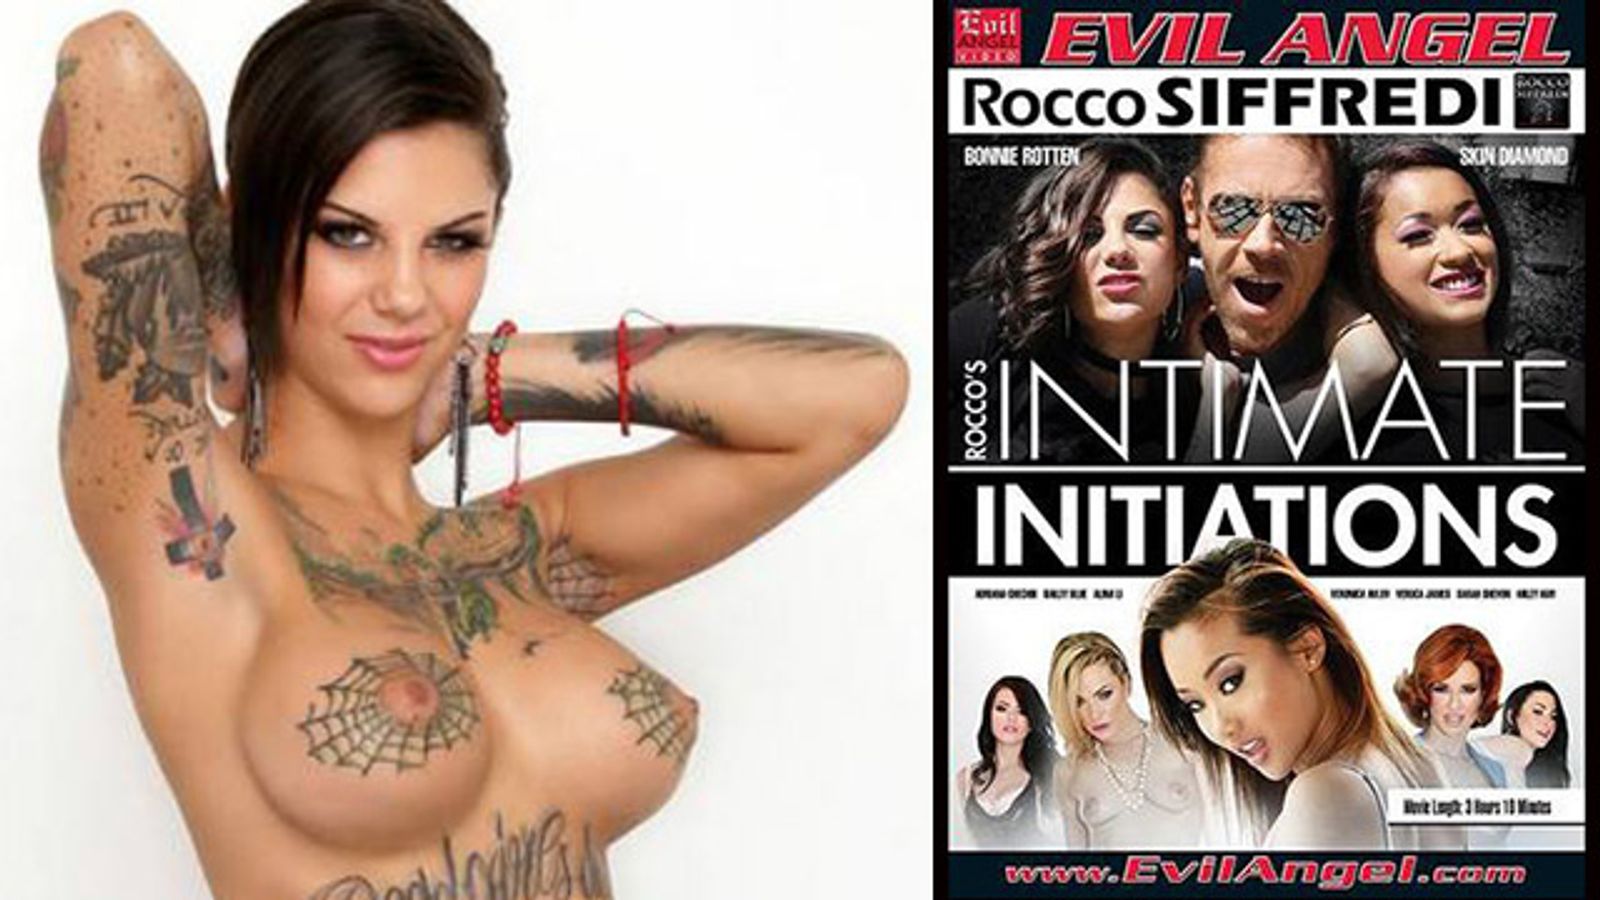 Bonnie Rotten Stars in New Rocco Movie Out This Week